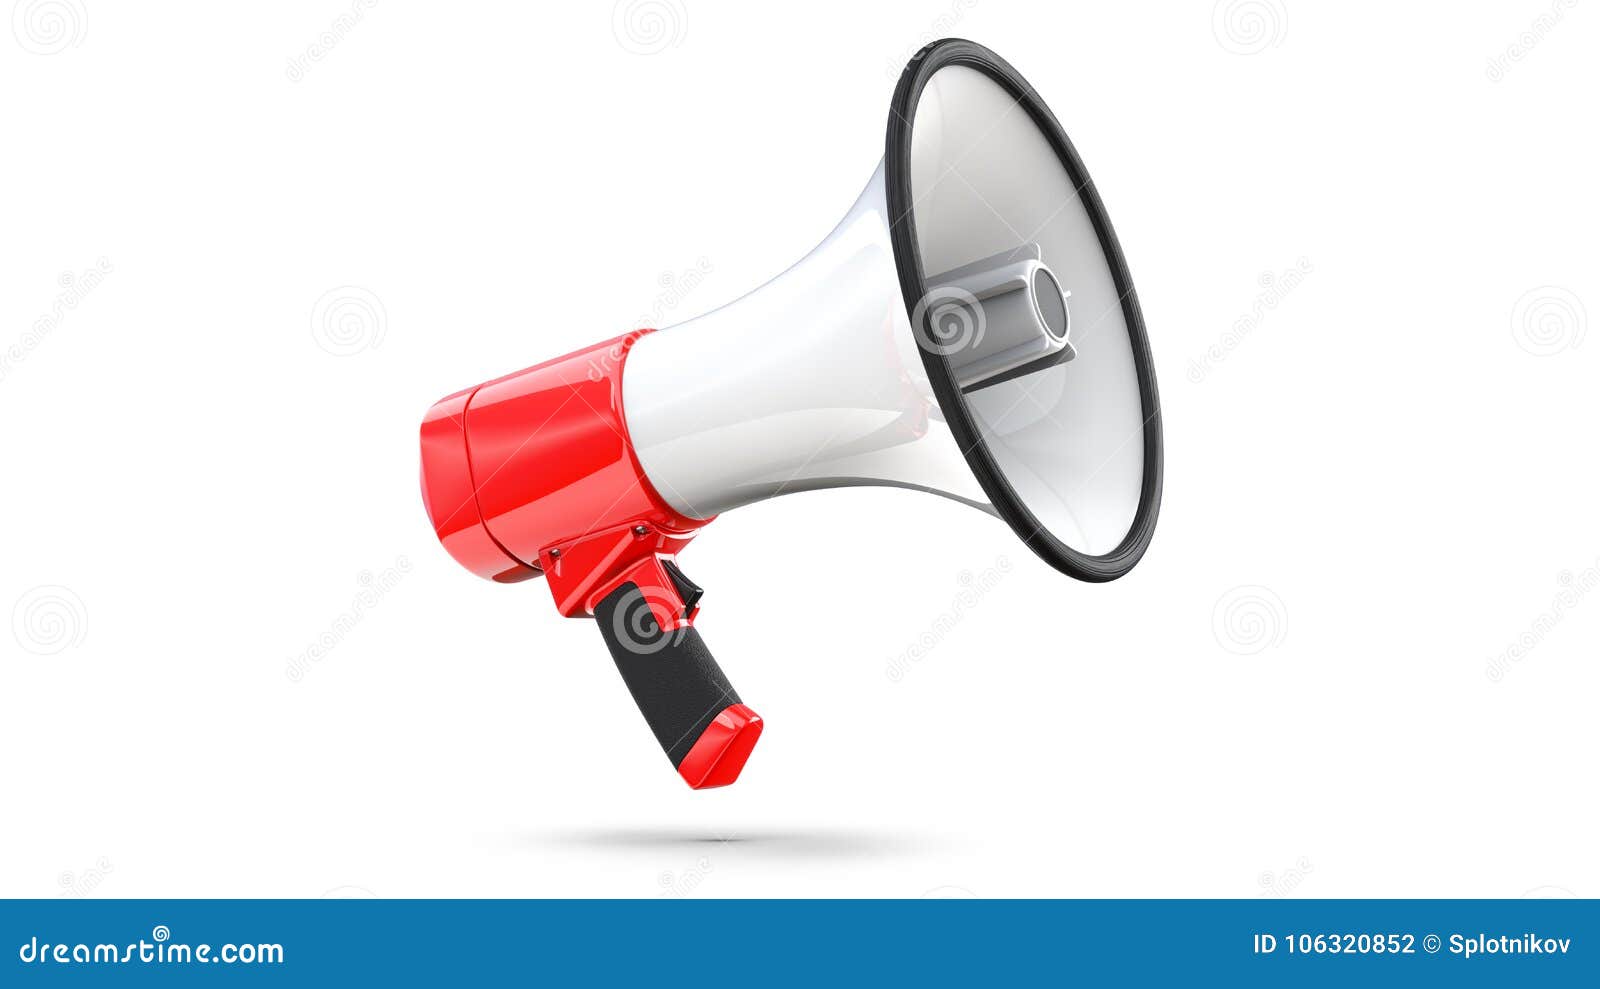 red and white megaphone  on white background. 3d rendering of bullhorn, file contains a clipping path to